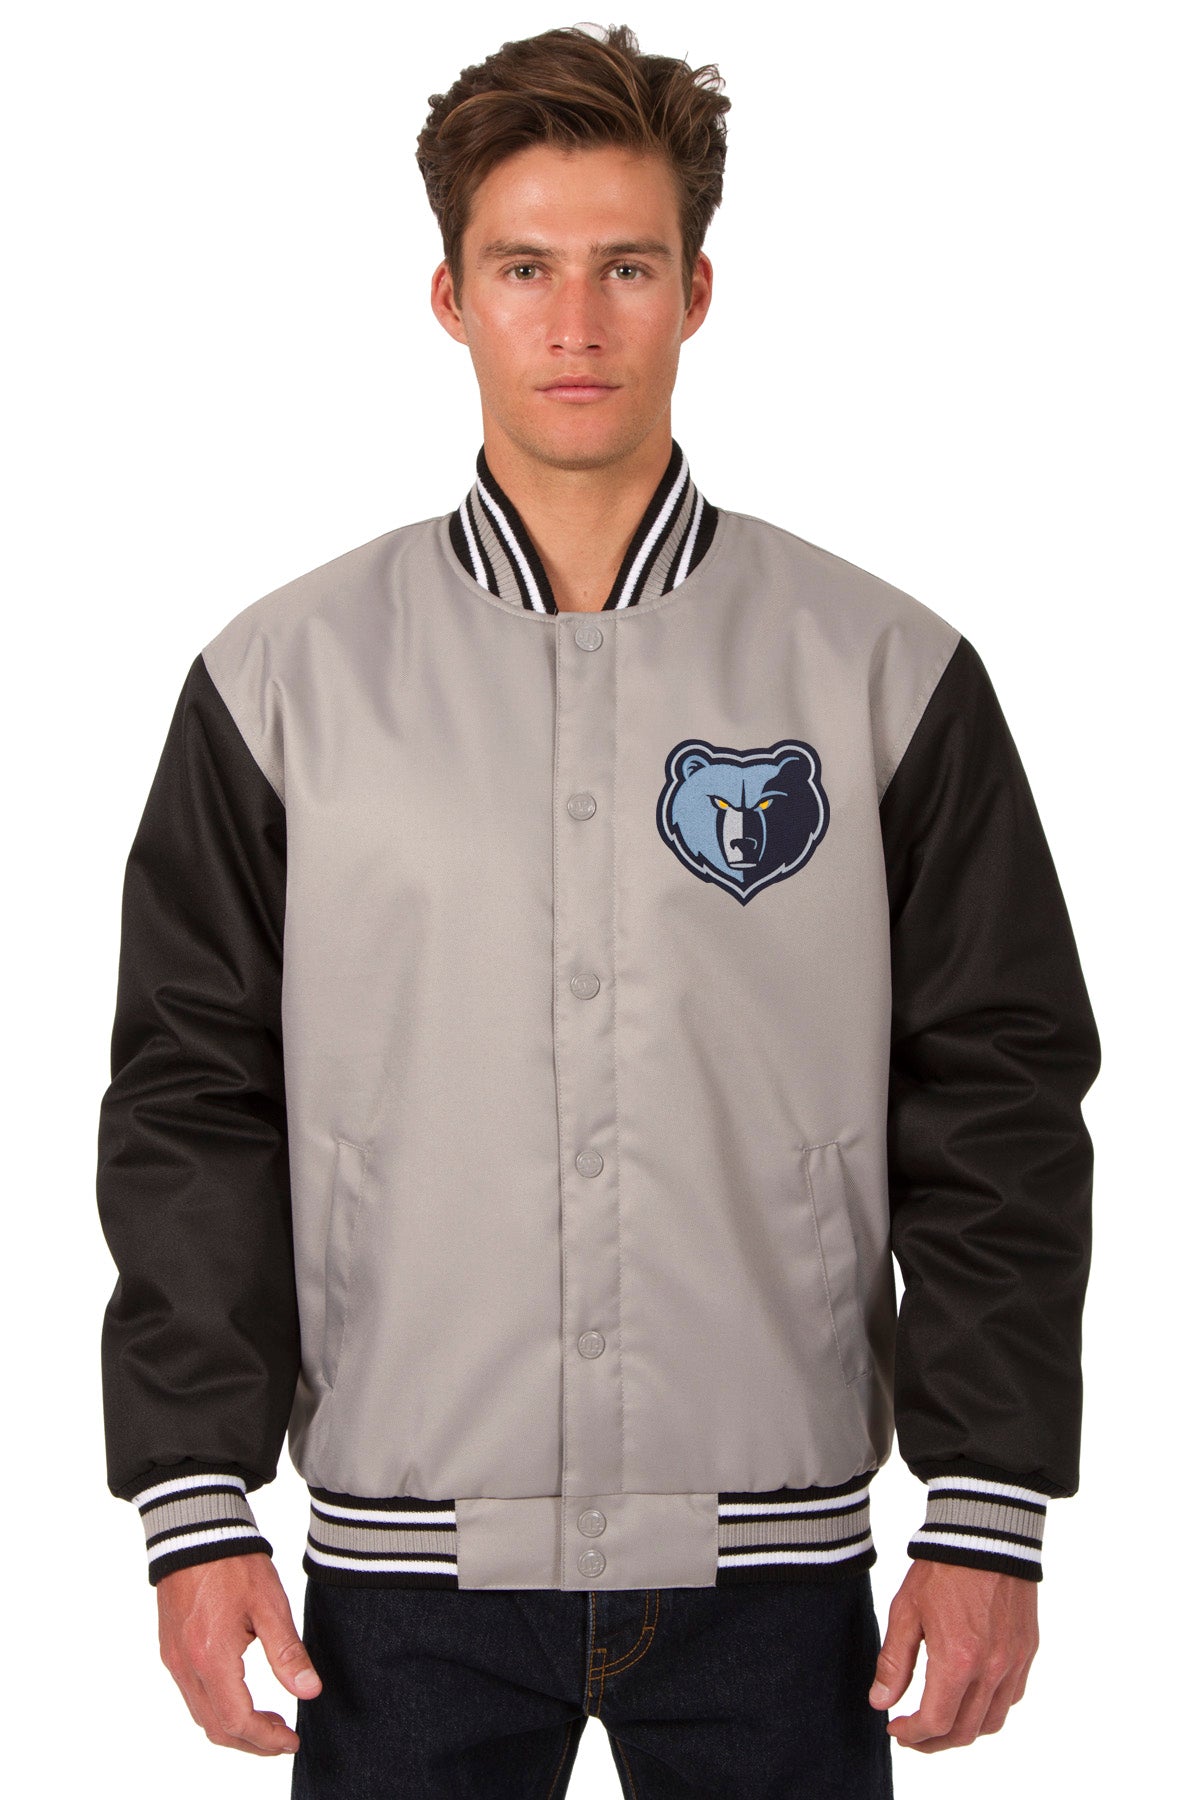 Memphis Grizzlies Poly-Twill Jacket